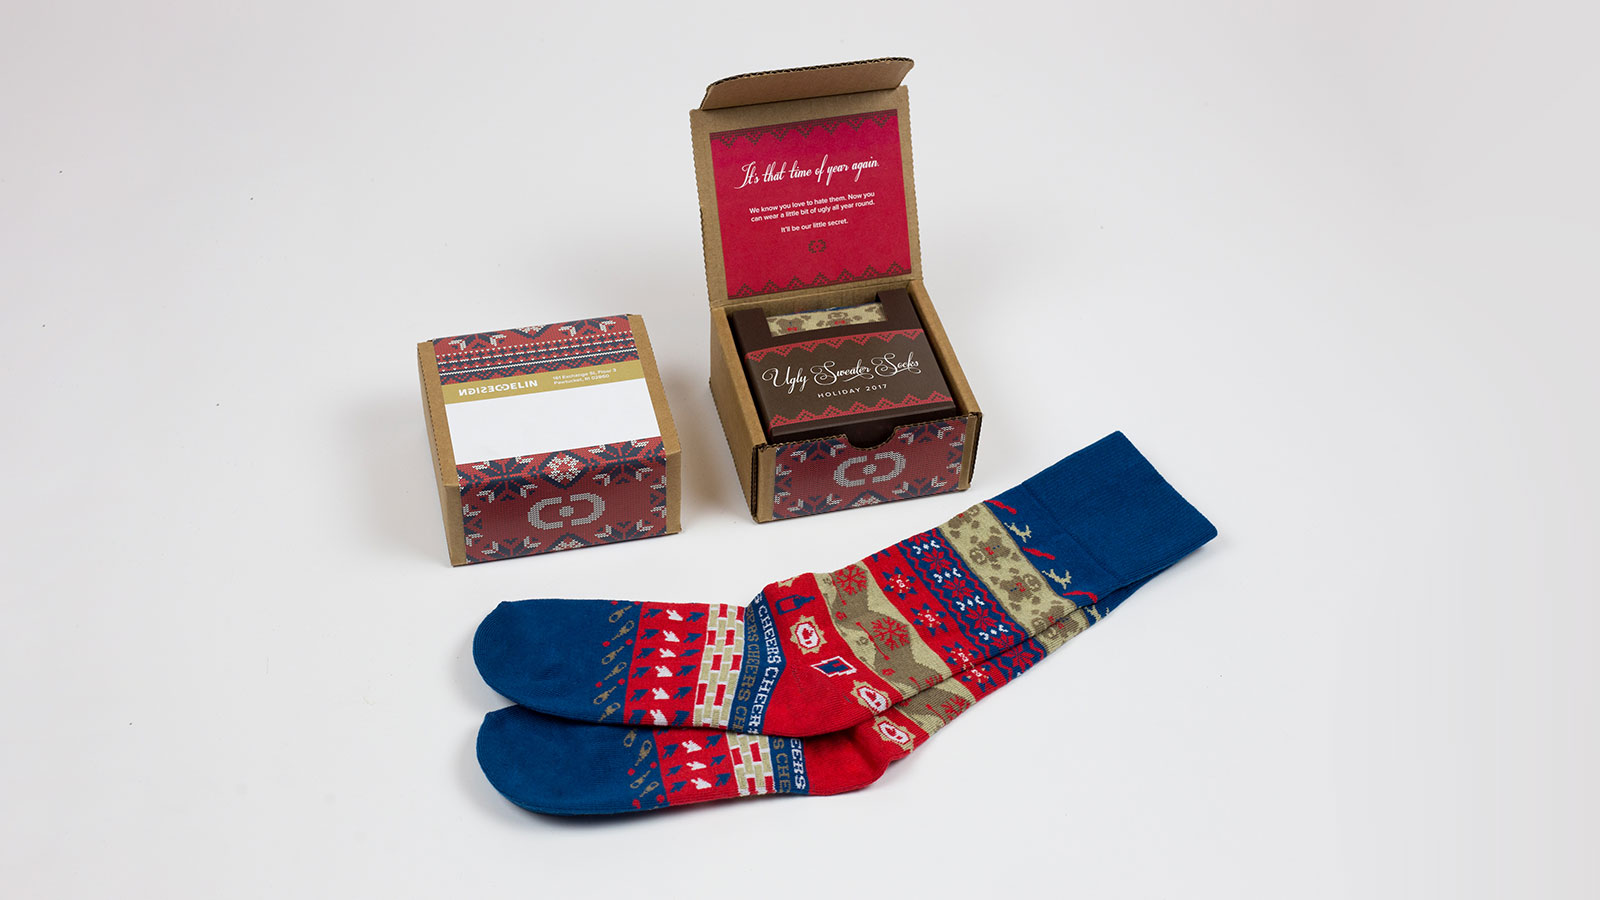 Ugly Sweater Socks Holiday Direct Mail Promotion – Packaging with Unfolded Socks